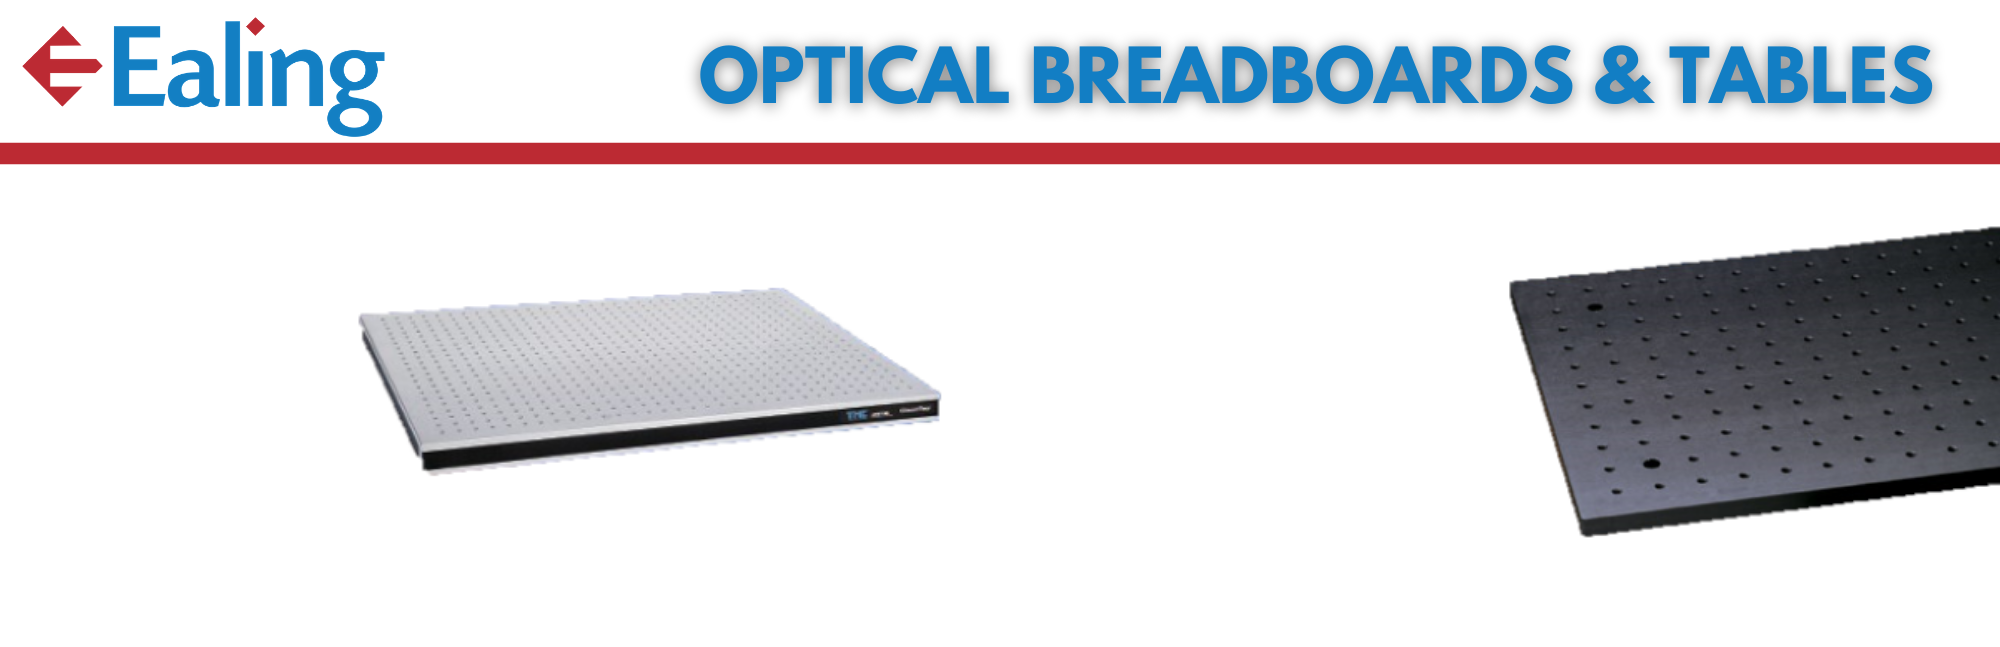 Optical Breadboards & Tables